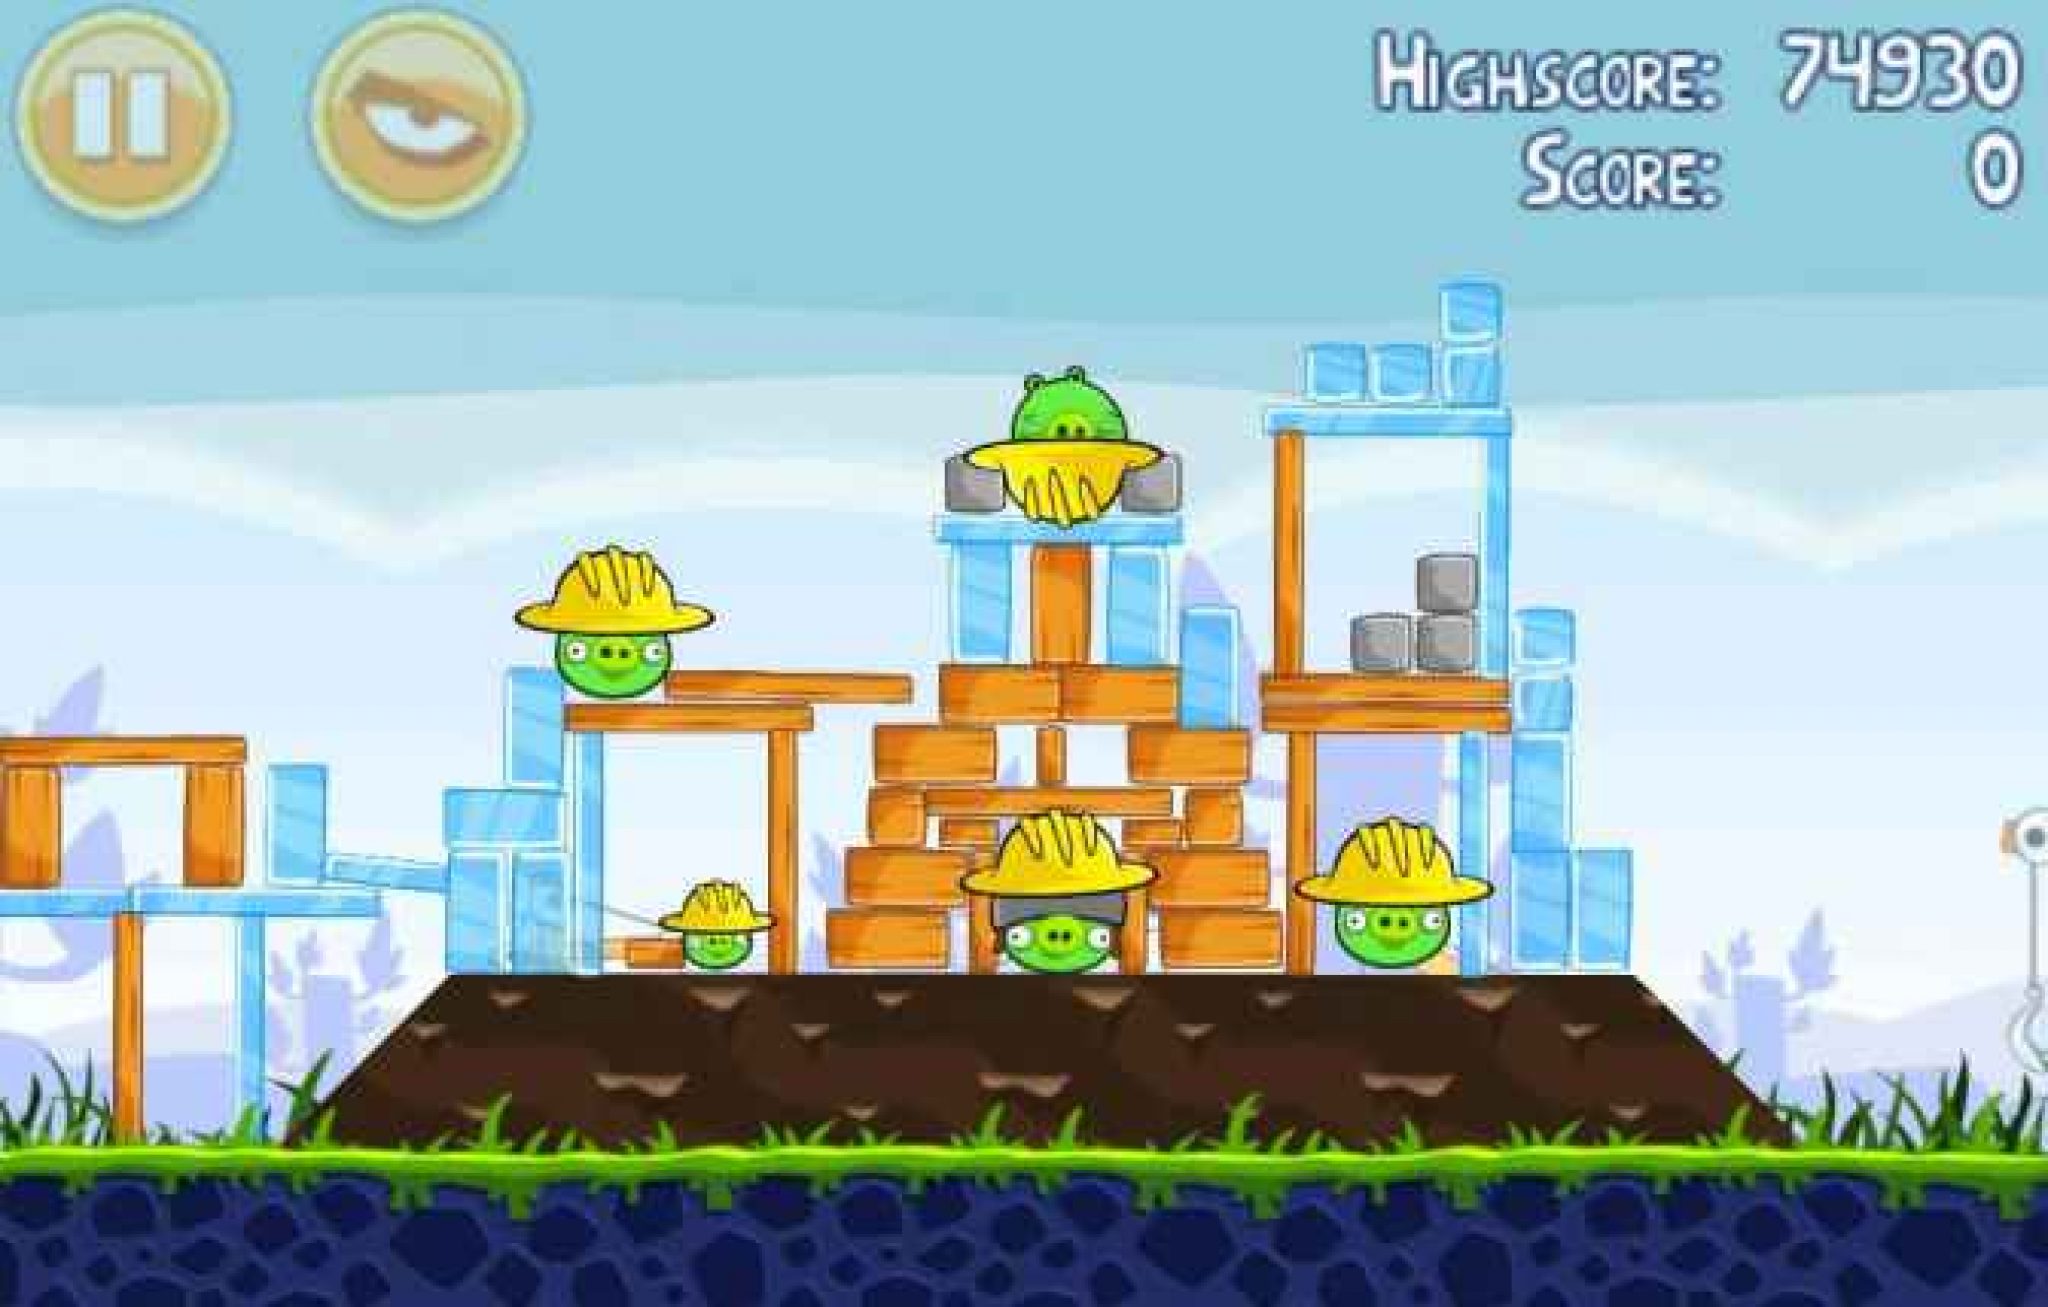 angry birds game free download for pc full version windows 10